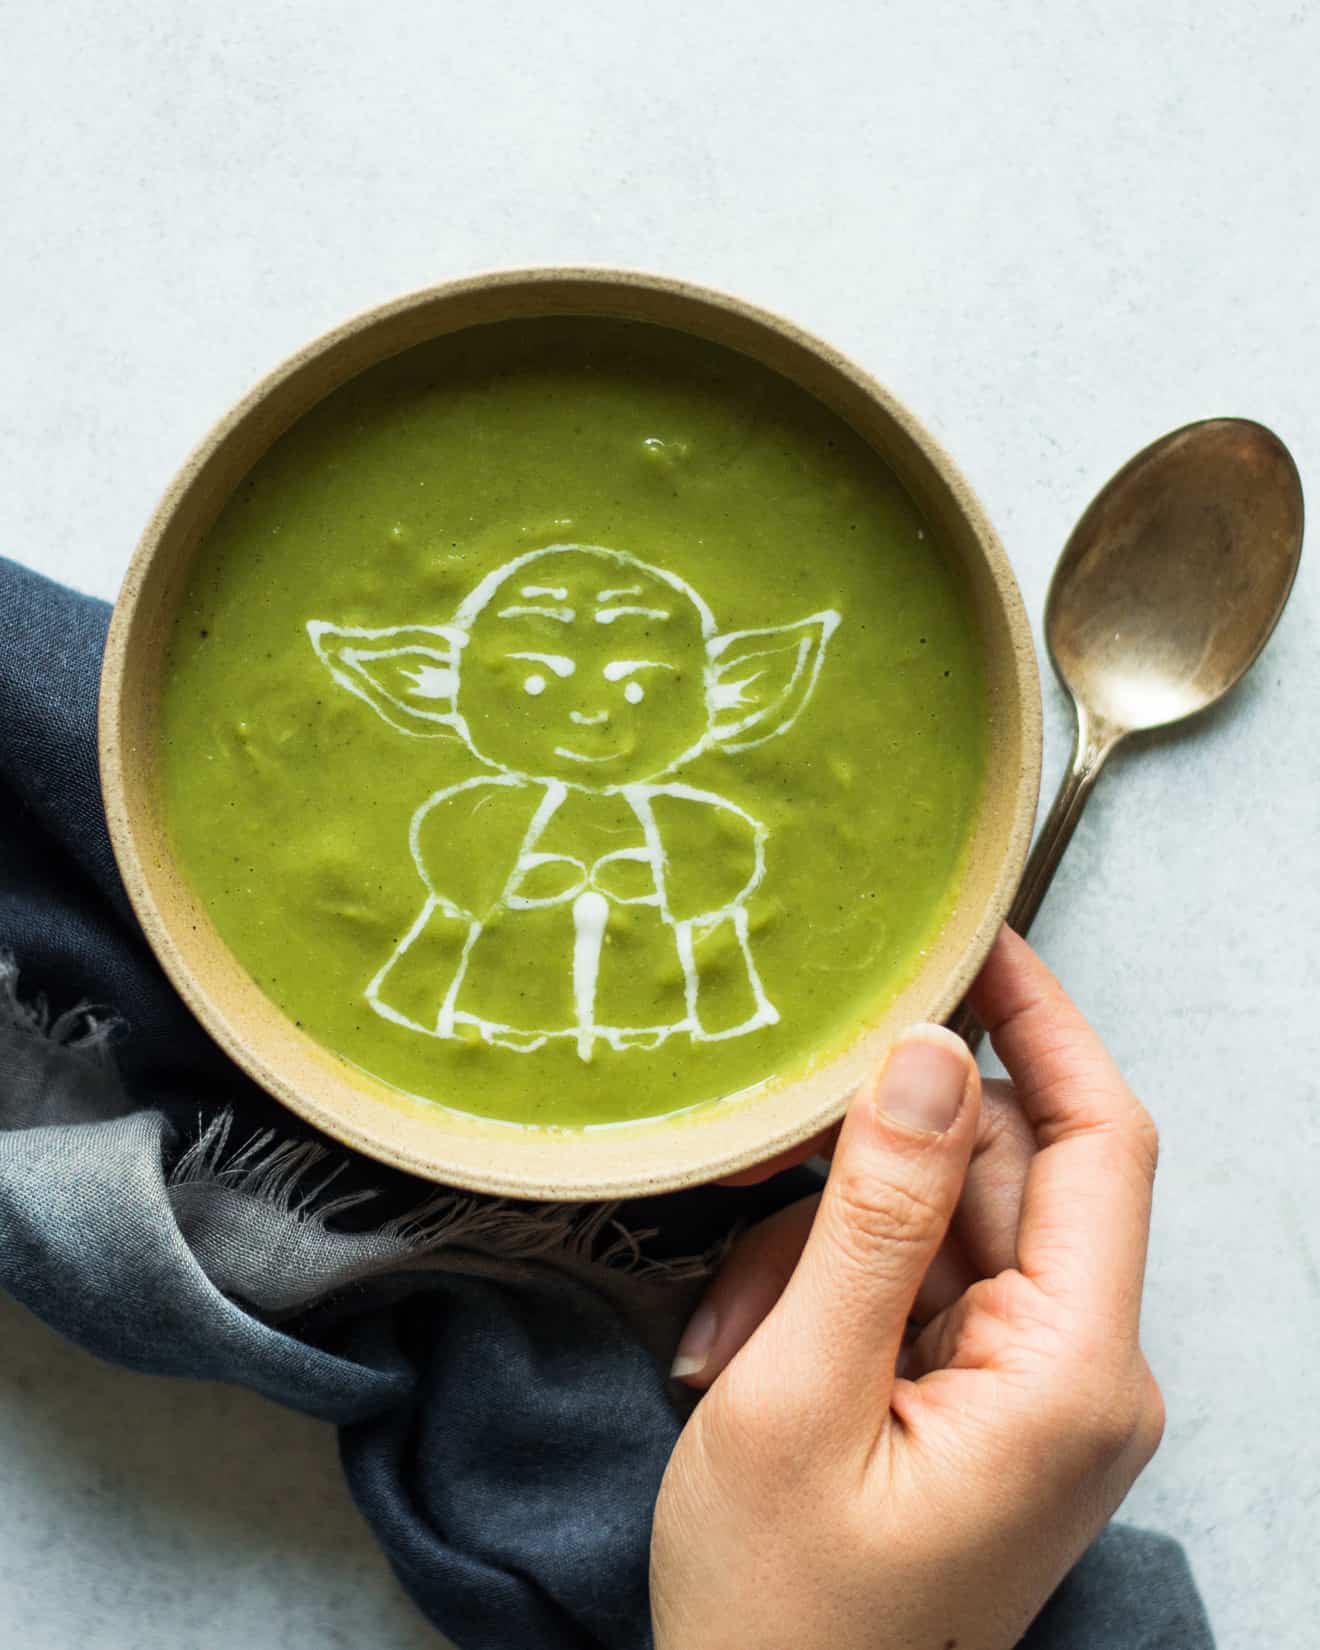 Pea and Mint Soup - a healthy, gluten free soup that's packed with vegetables!